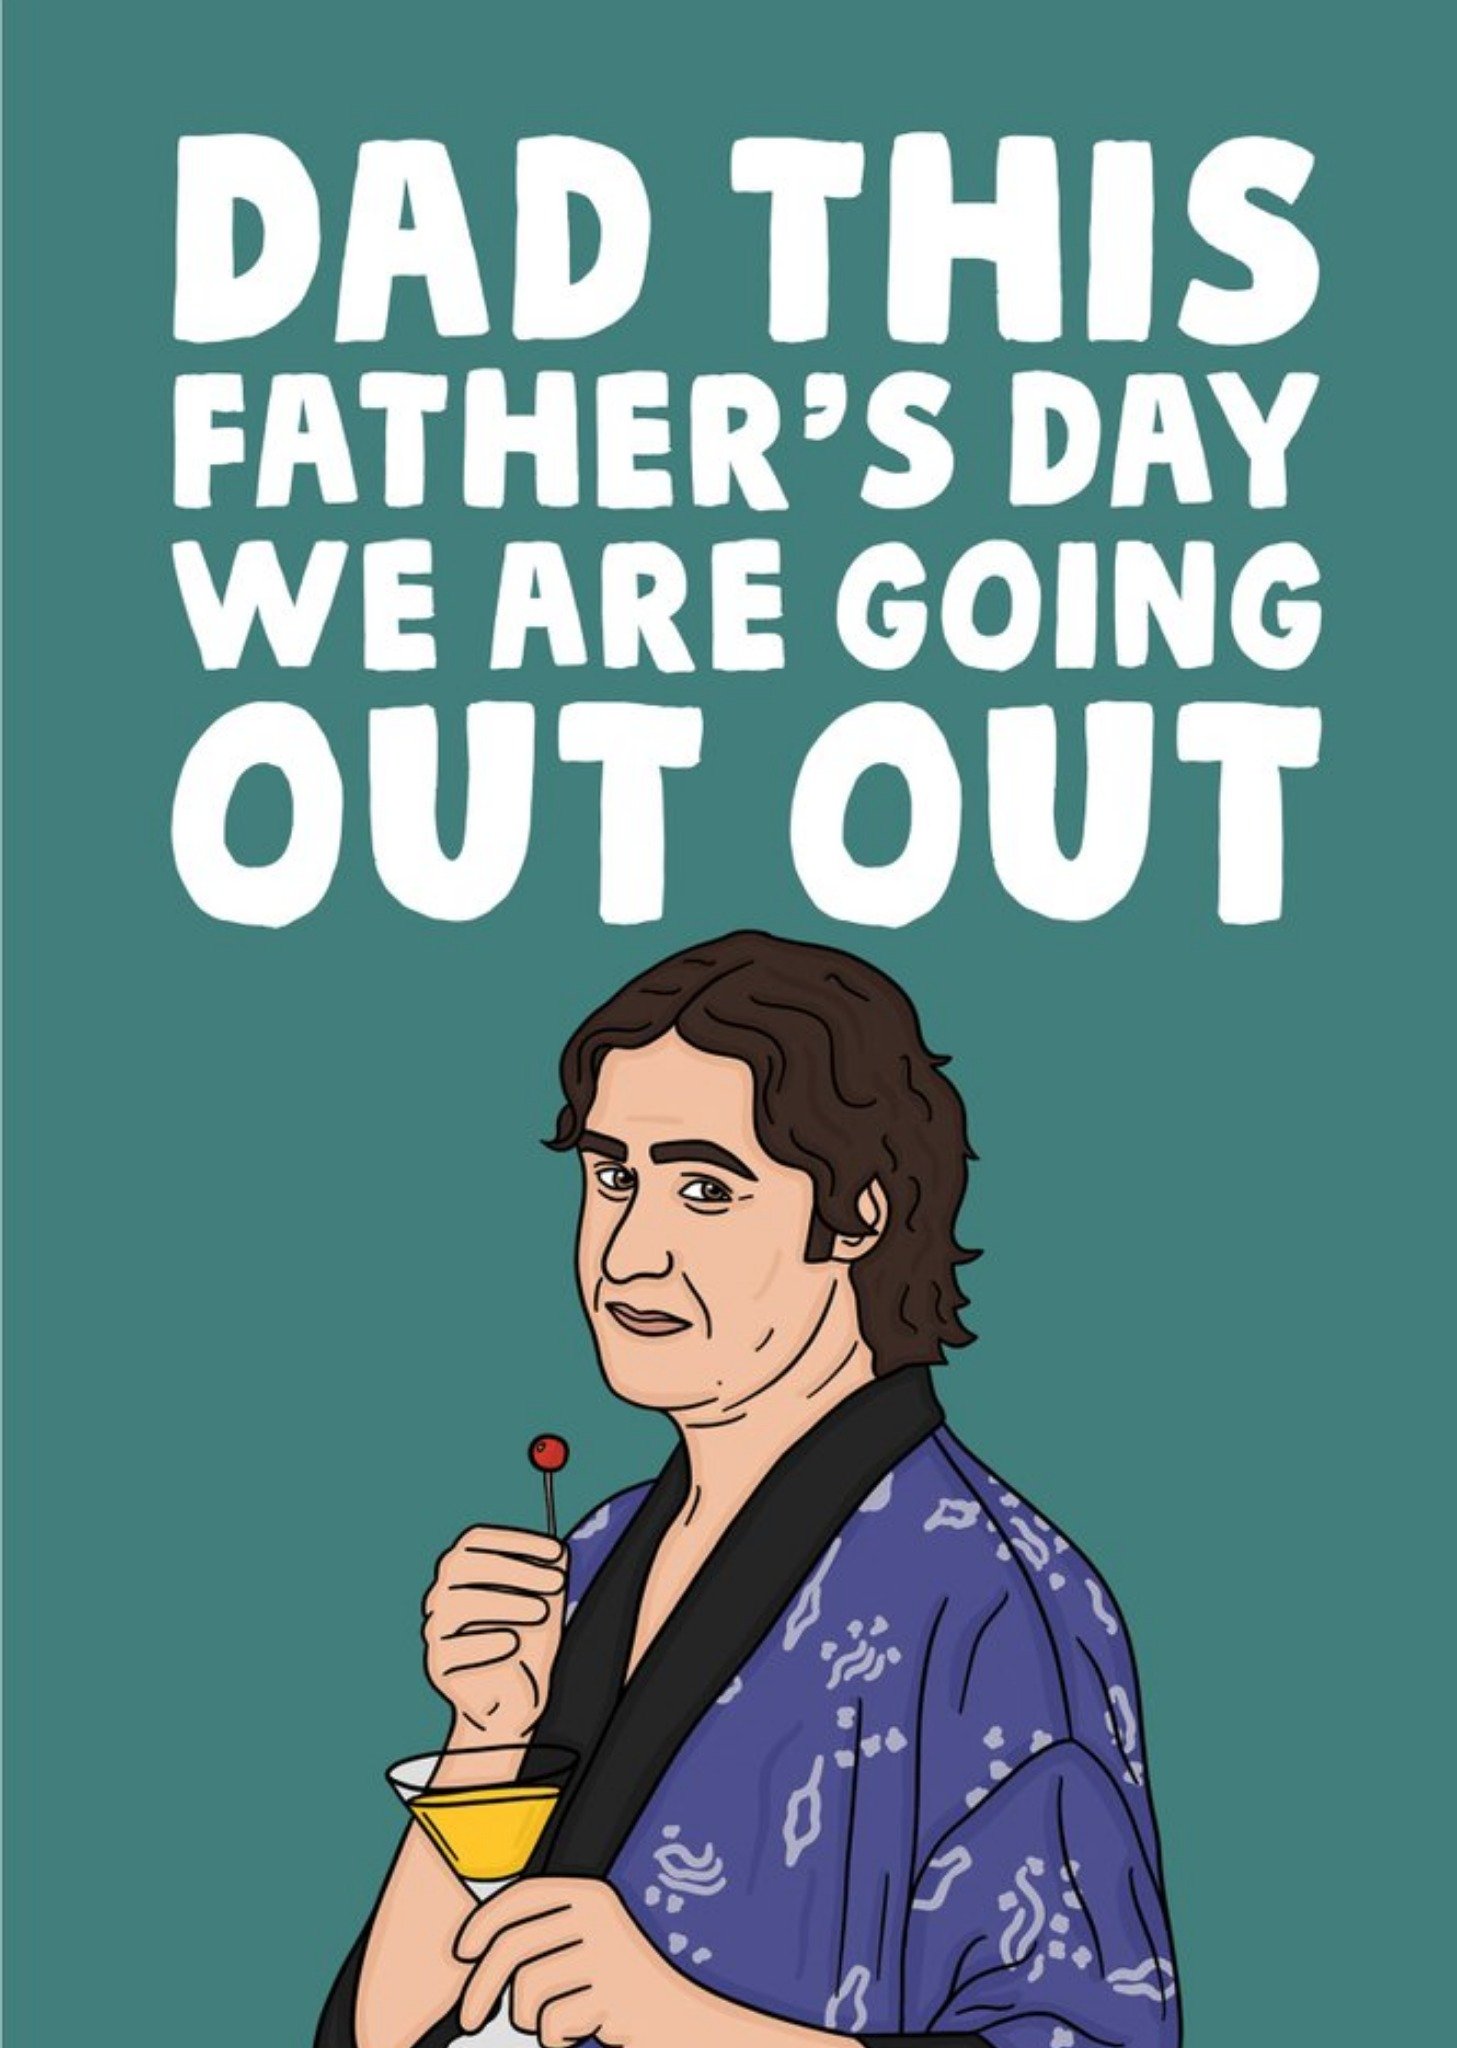 Moonpig Funny Illustrated Dad This Fathers Day We Are Going Out Out Card, Large